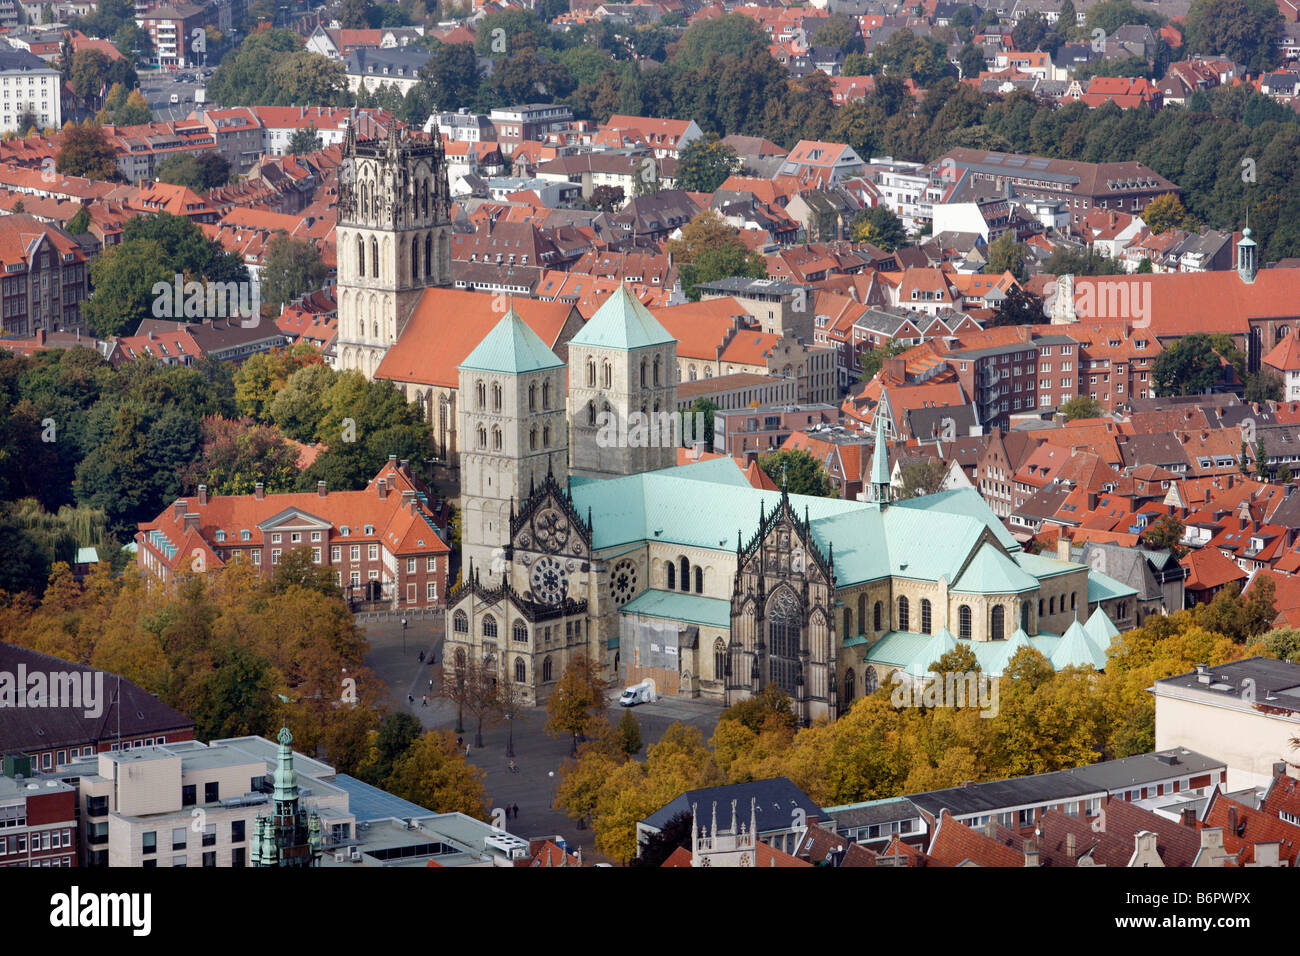 Historic town center of Munster, Stock Photo